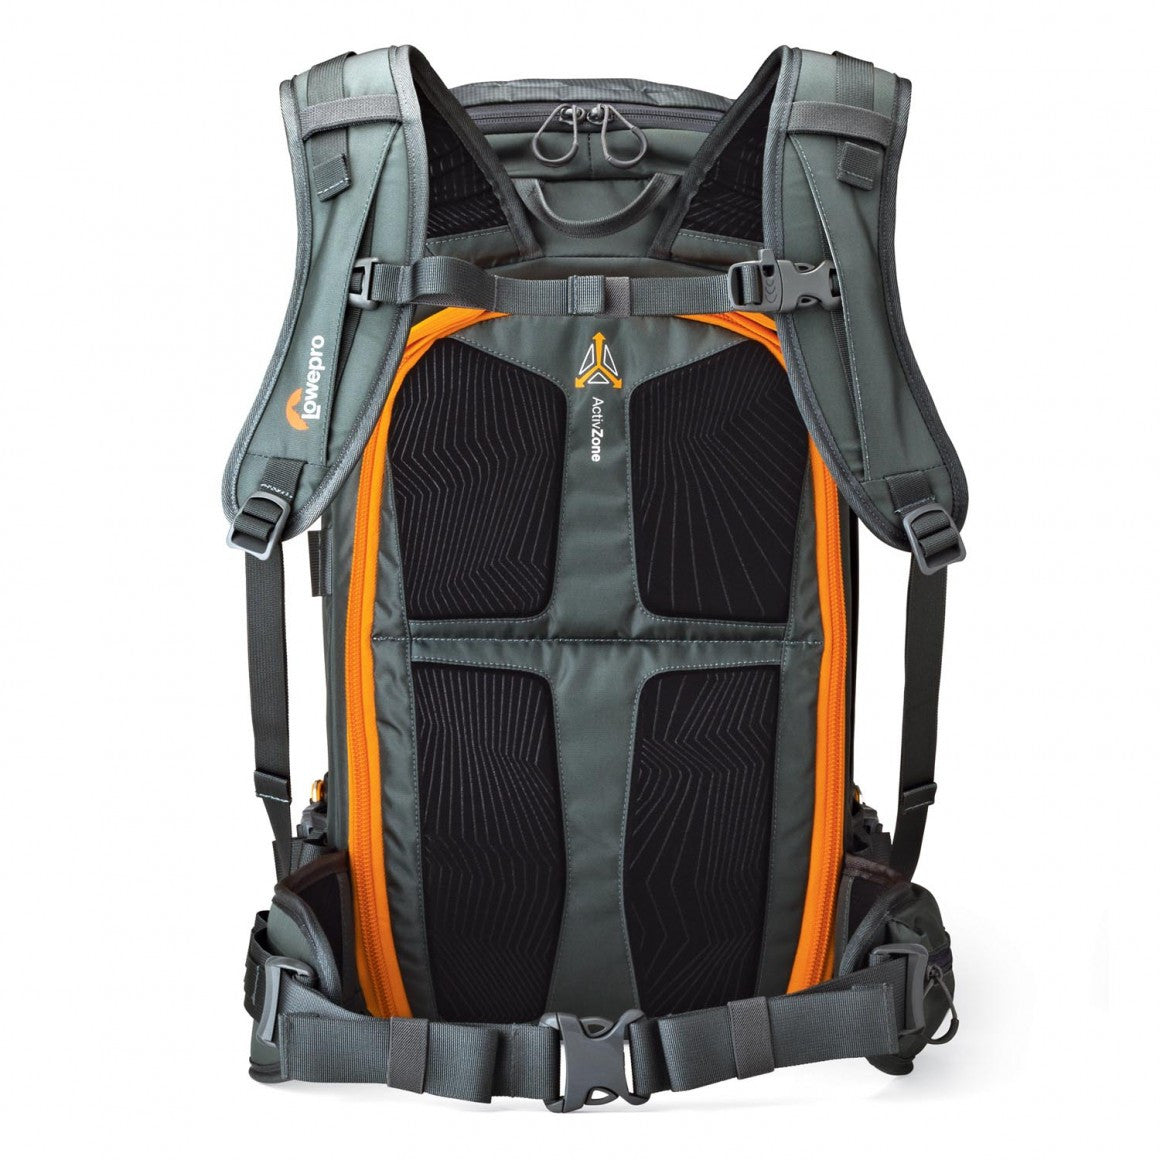 Lowepro Whistler 350AW Backpack (Grey), bags backpacks, Lowepro - Pictureline  - 4